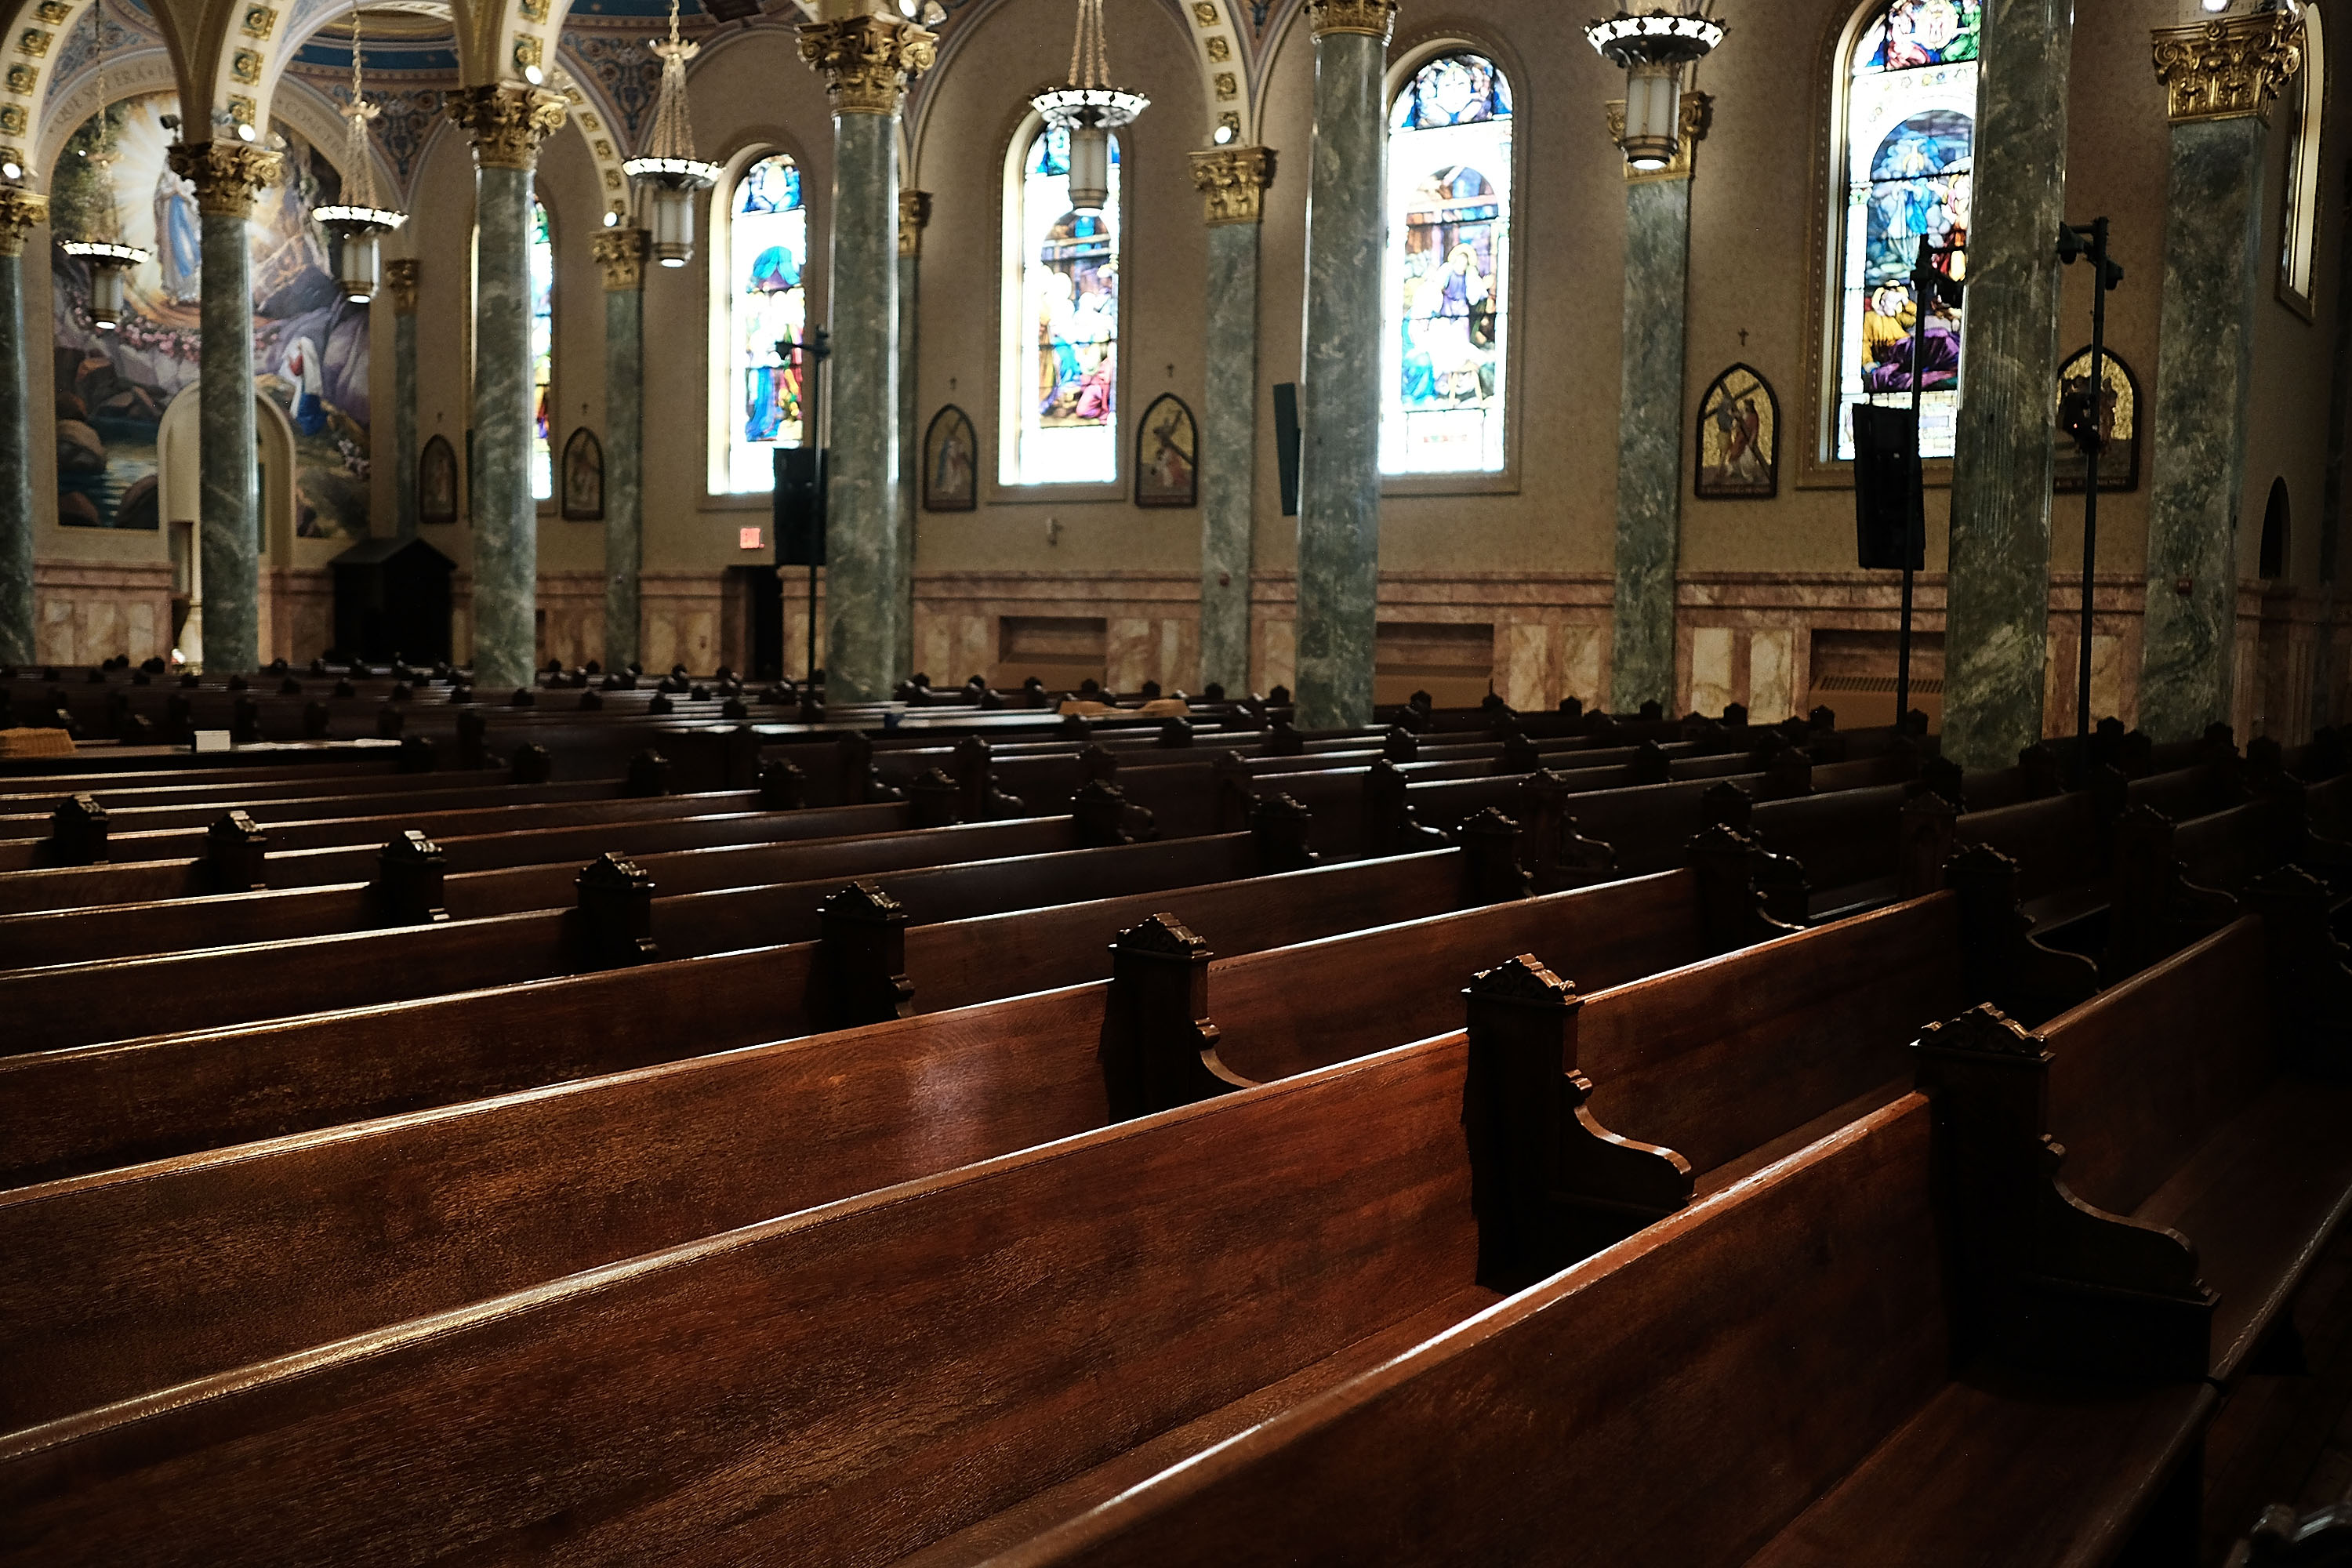 NEW YORK, NY - SEPTEMBER 19: Empty pews stand in a Catholic church in Brooklyn on September 19, 2018 in New York City. (Spencer Platt/Getty Images)